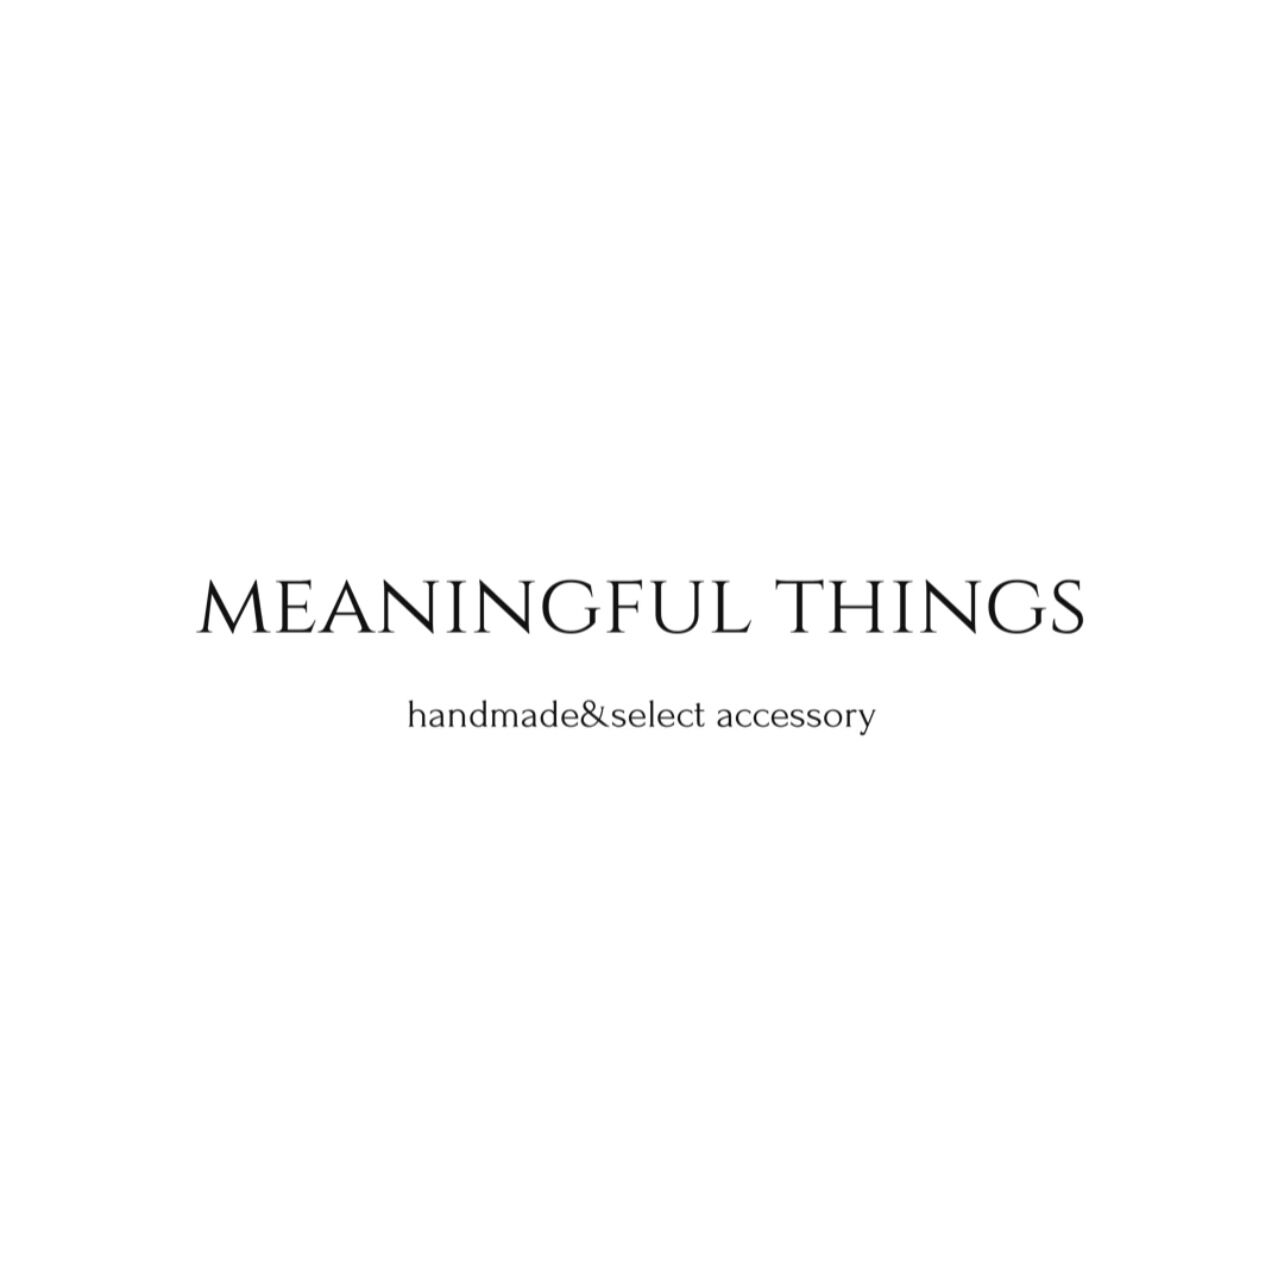 meaningful things